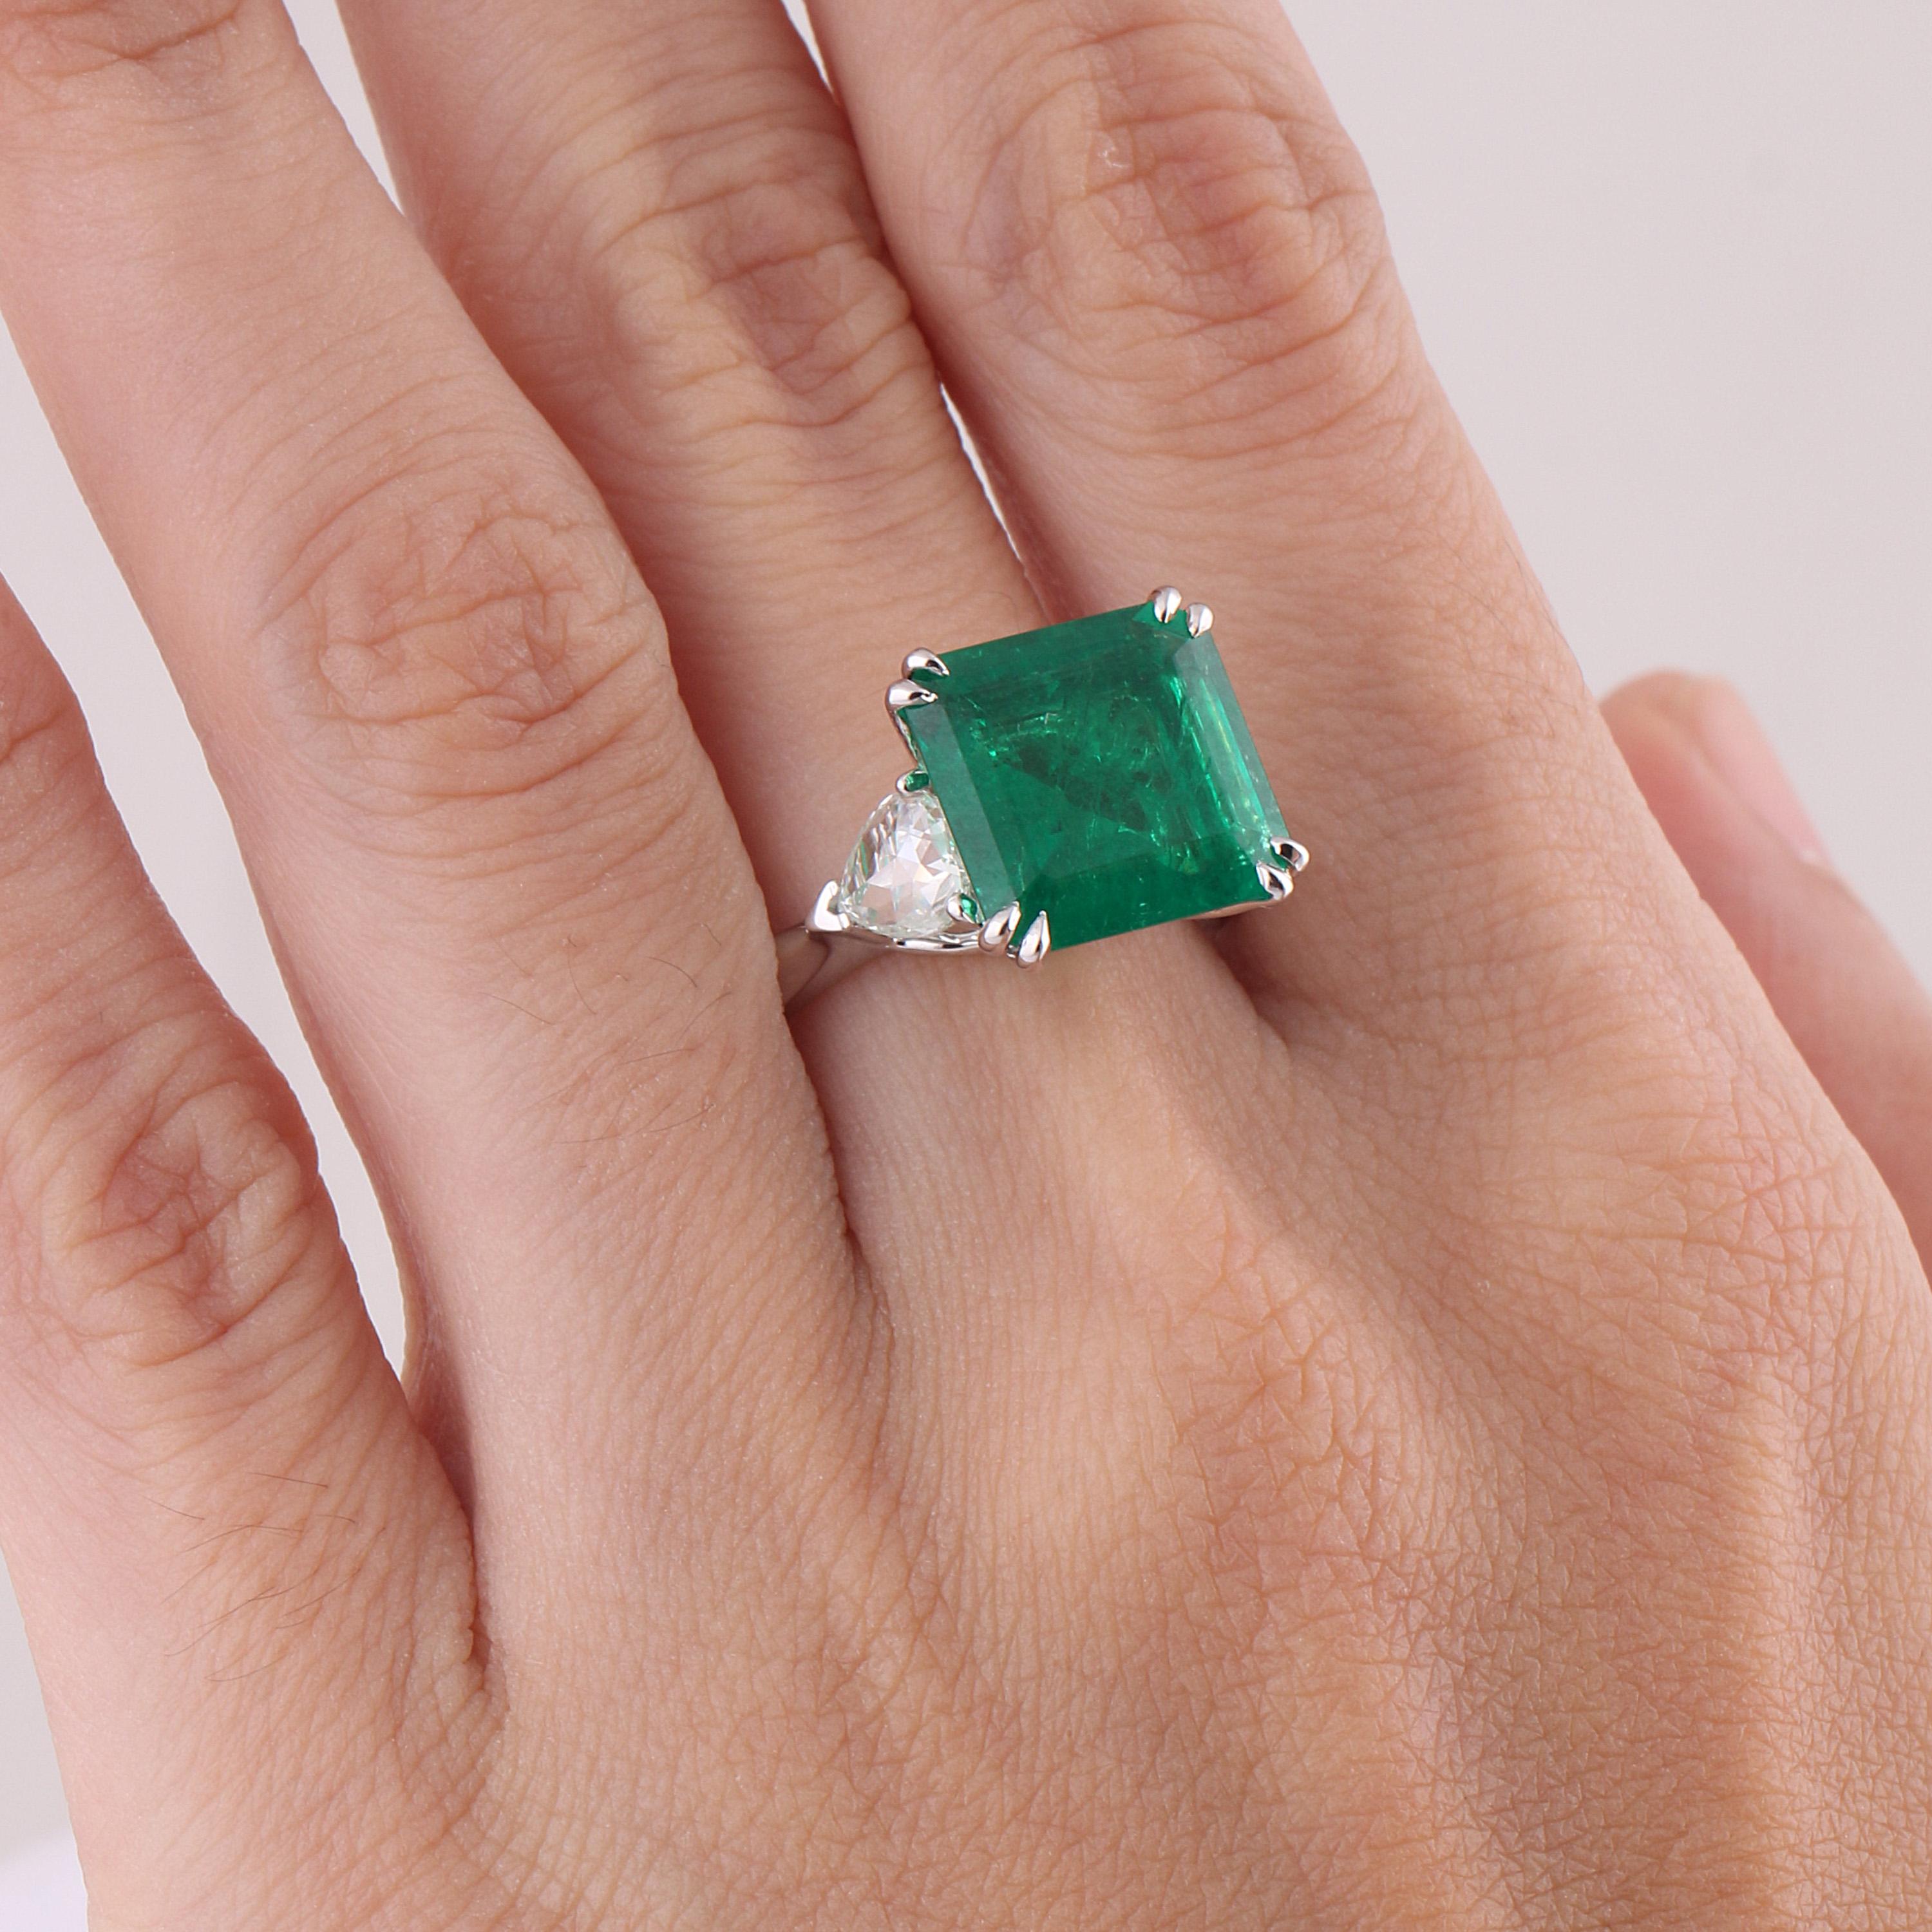 Modern Studio Rêves 5.51 Carat Emerald and Trillion Rose Cut Diamond Ring in 18K Gold For Sale